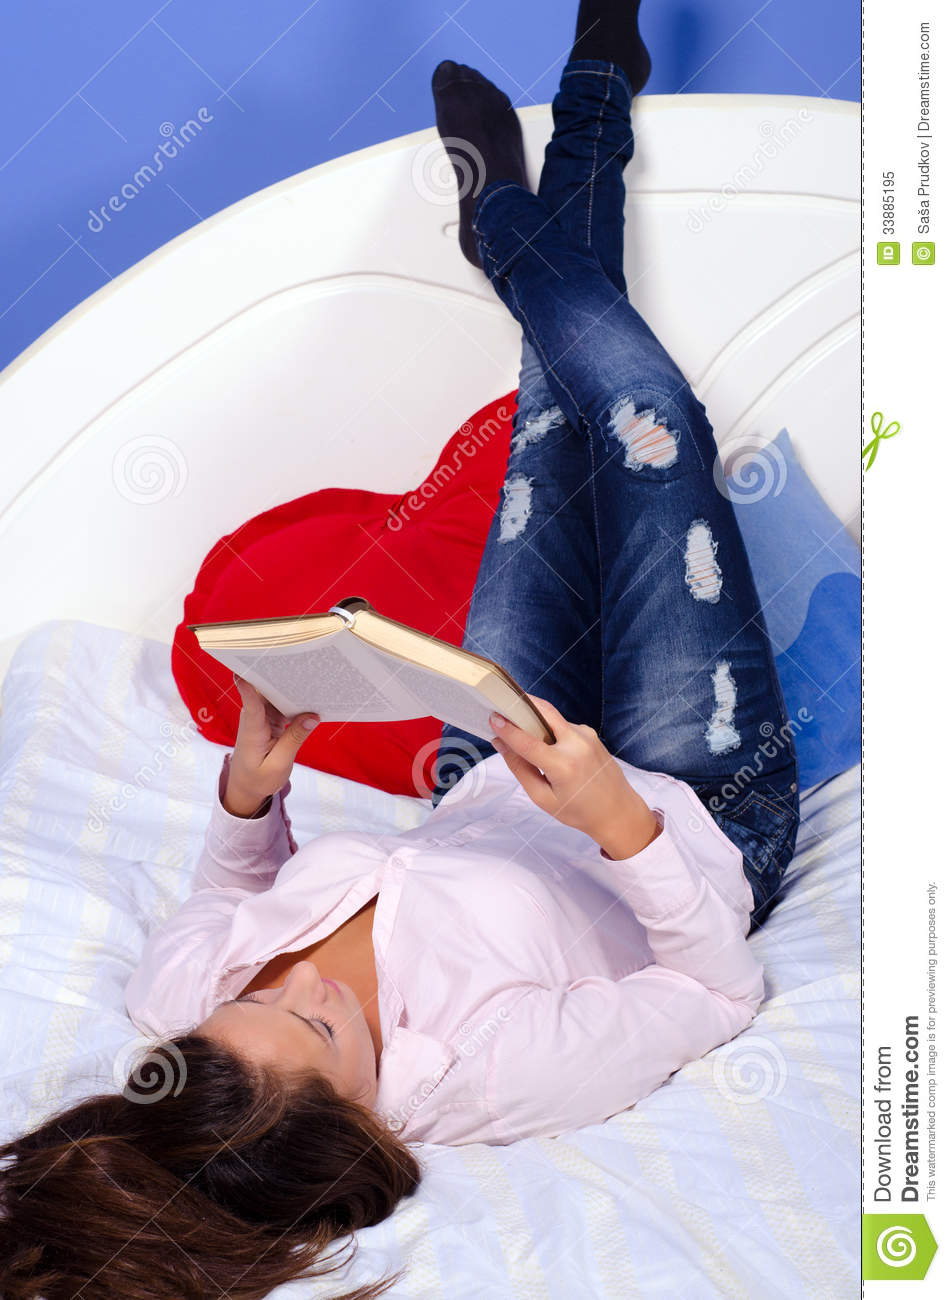 Girl Reading Book In Bed Royalty Free Stock Photo   Image  33885195